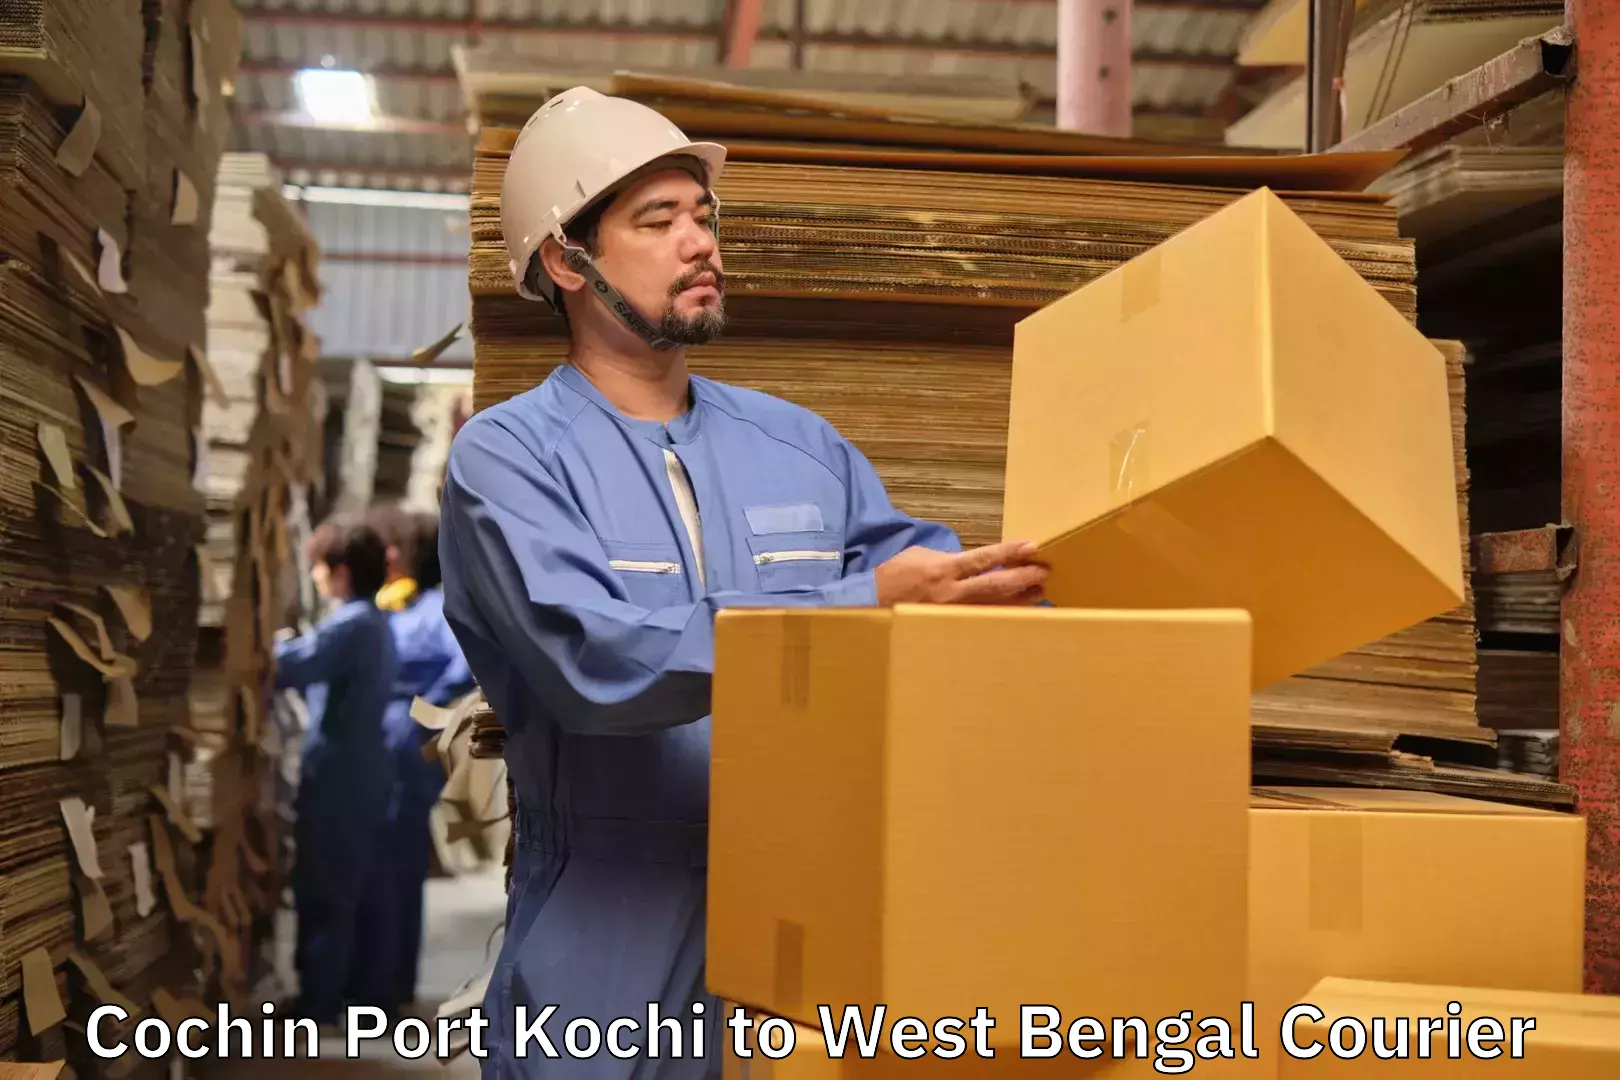 Luggage delivery network Cochin Port Kochi to Paranpur